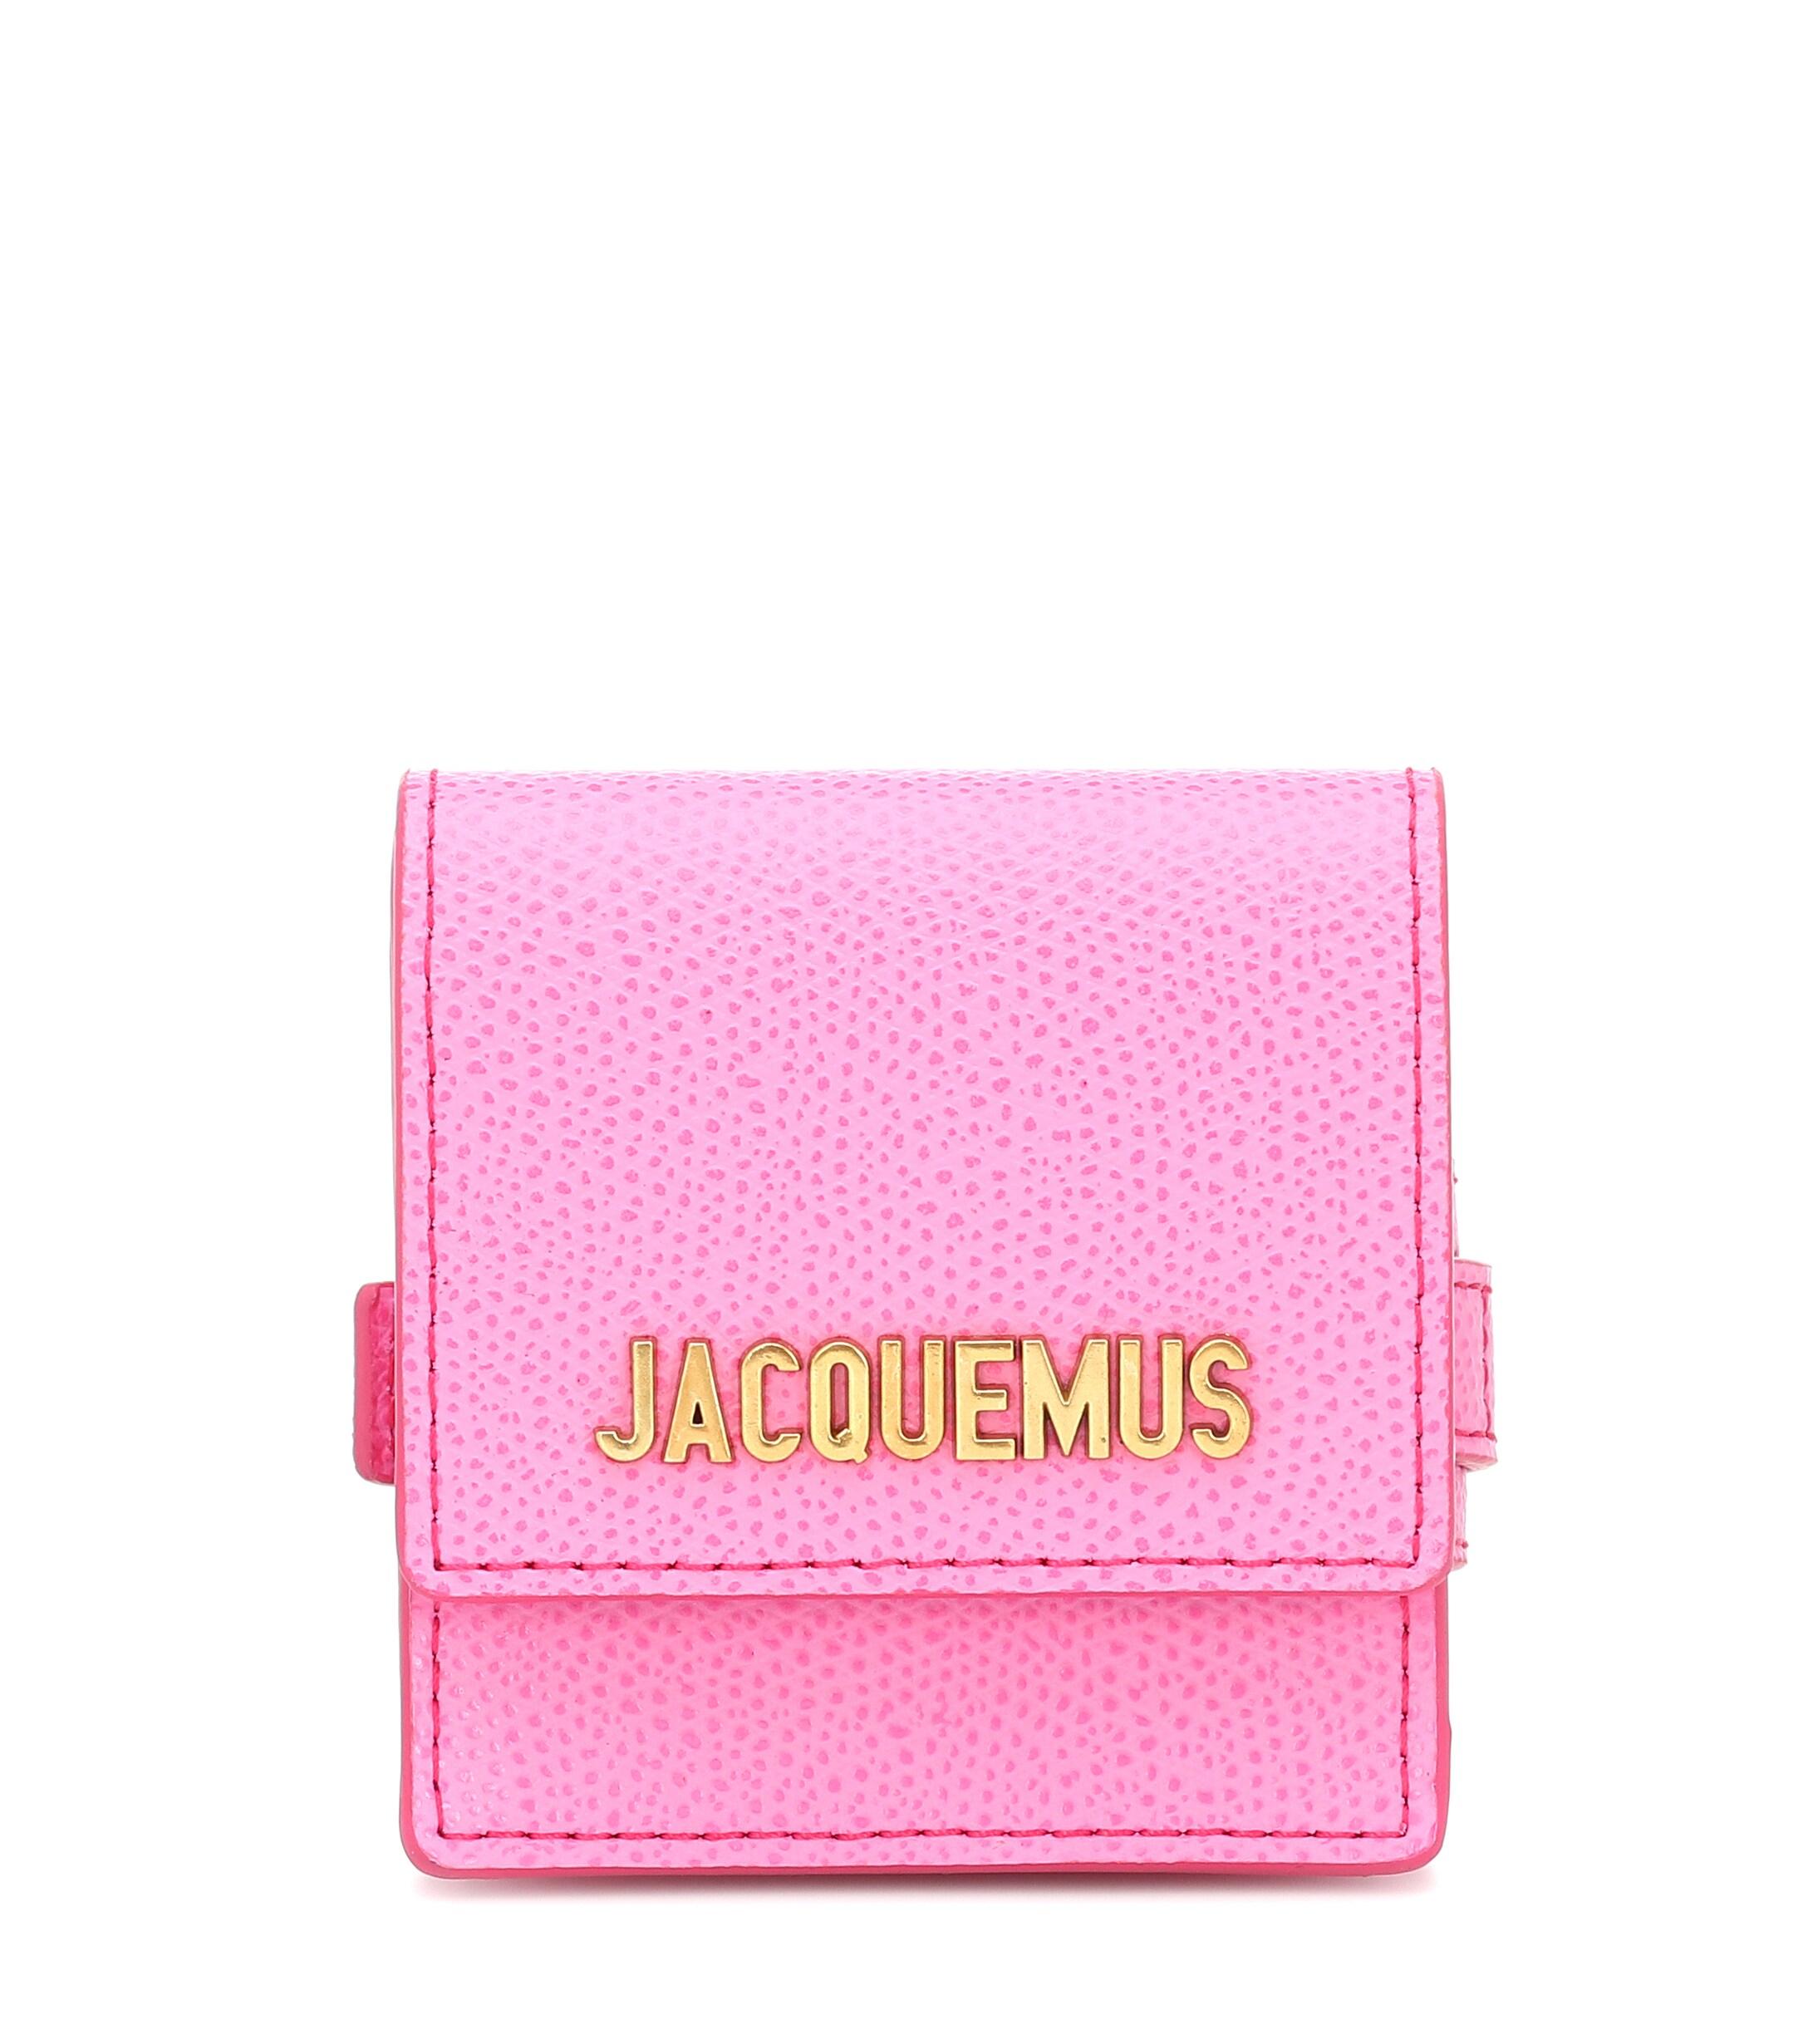 Jacquemus Grained-leather Coin-purse Bracelet in Pink | Lyst